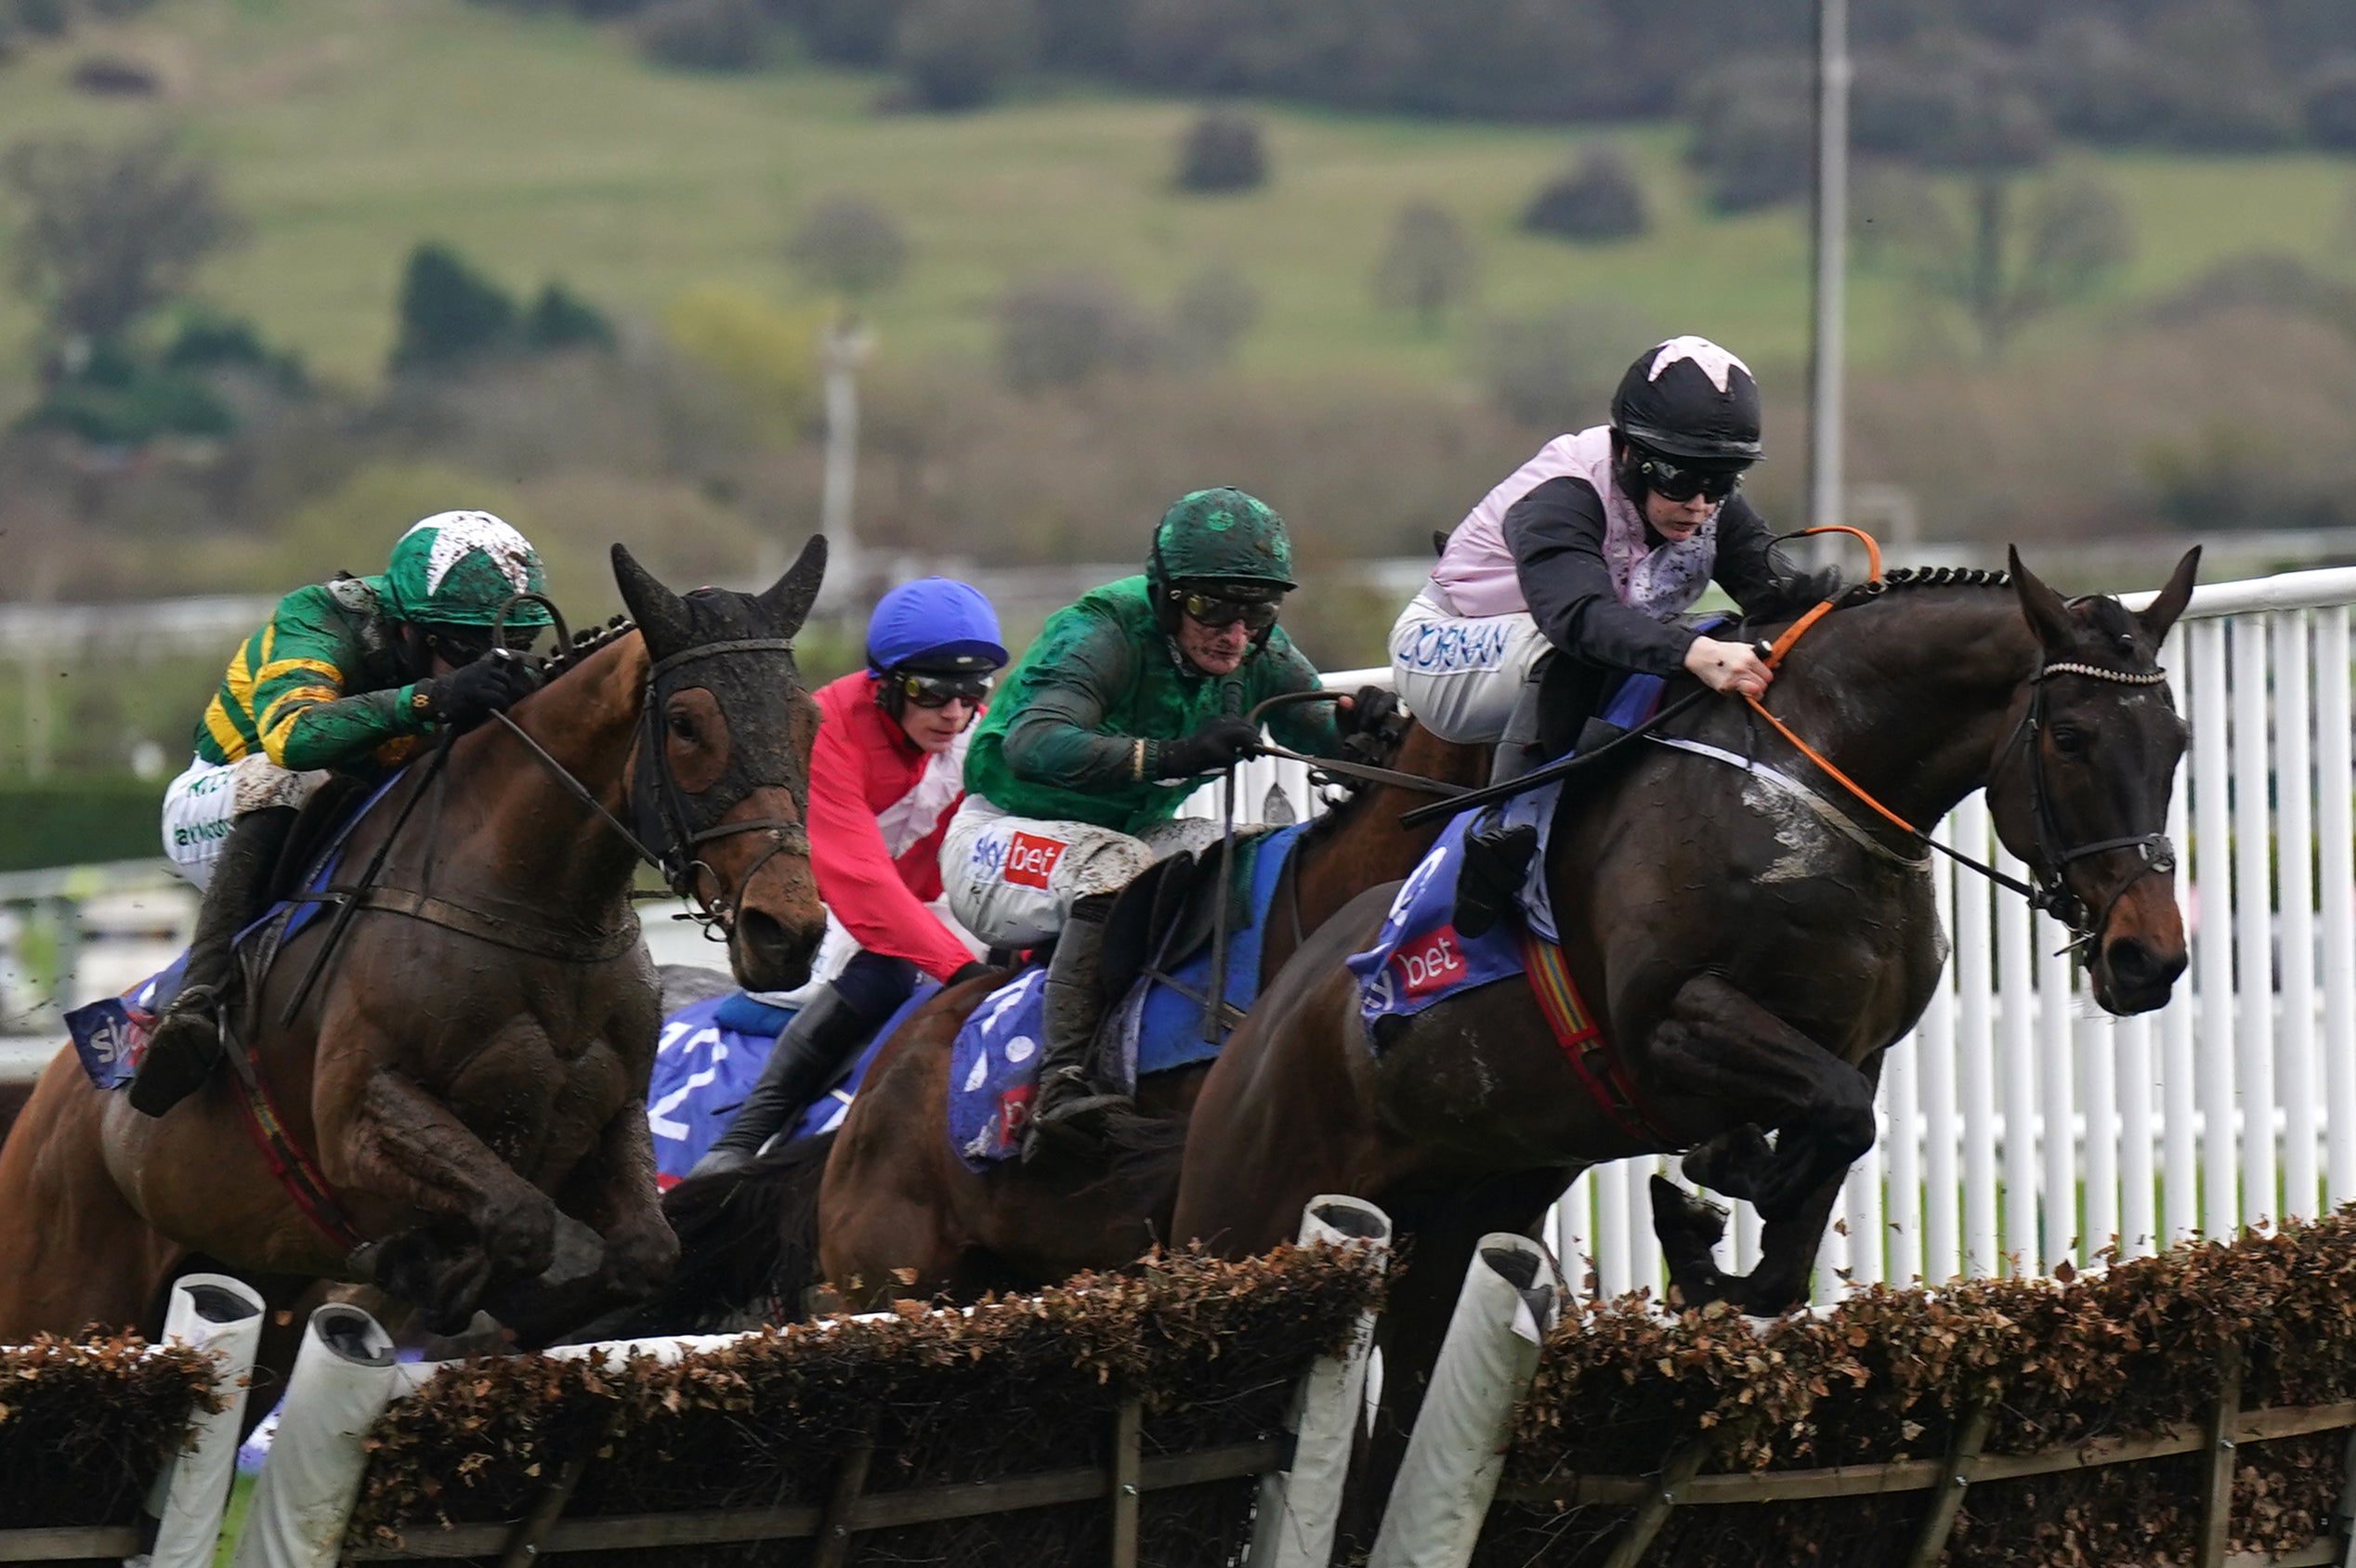 Rachael Blackmore and Slade Steel won the Supreme Novices Hurdle to the delight of watching spectators